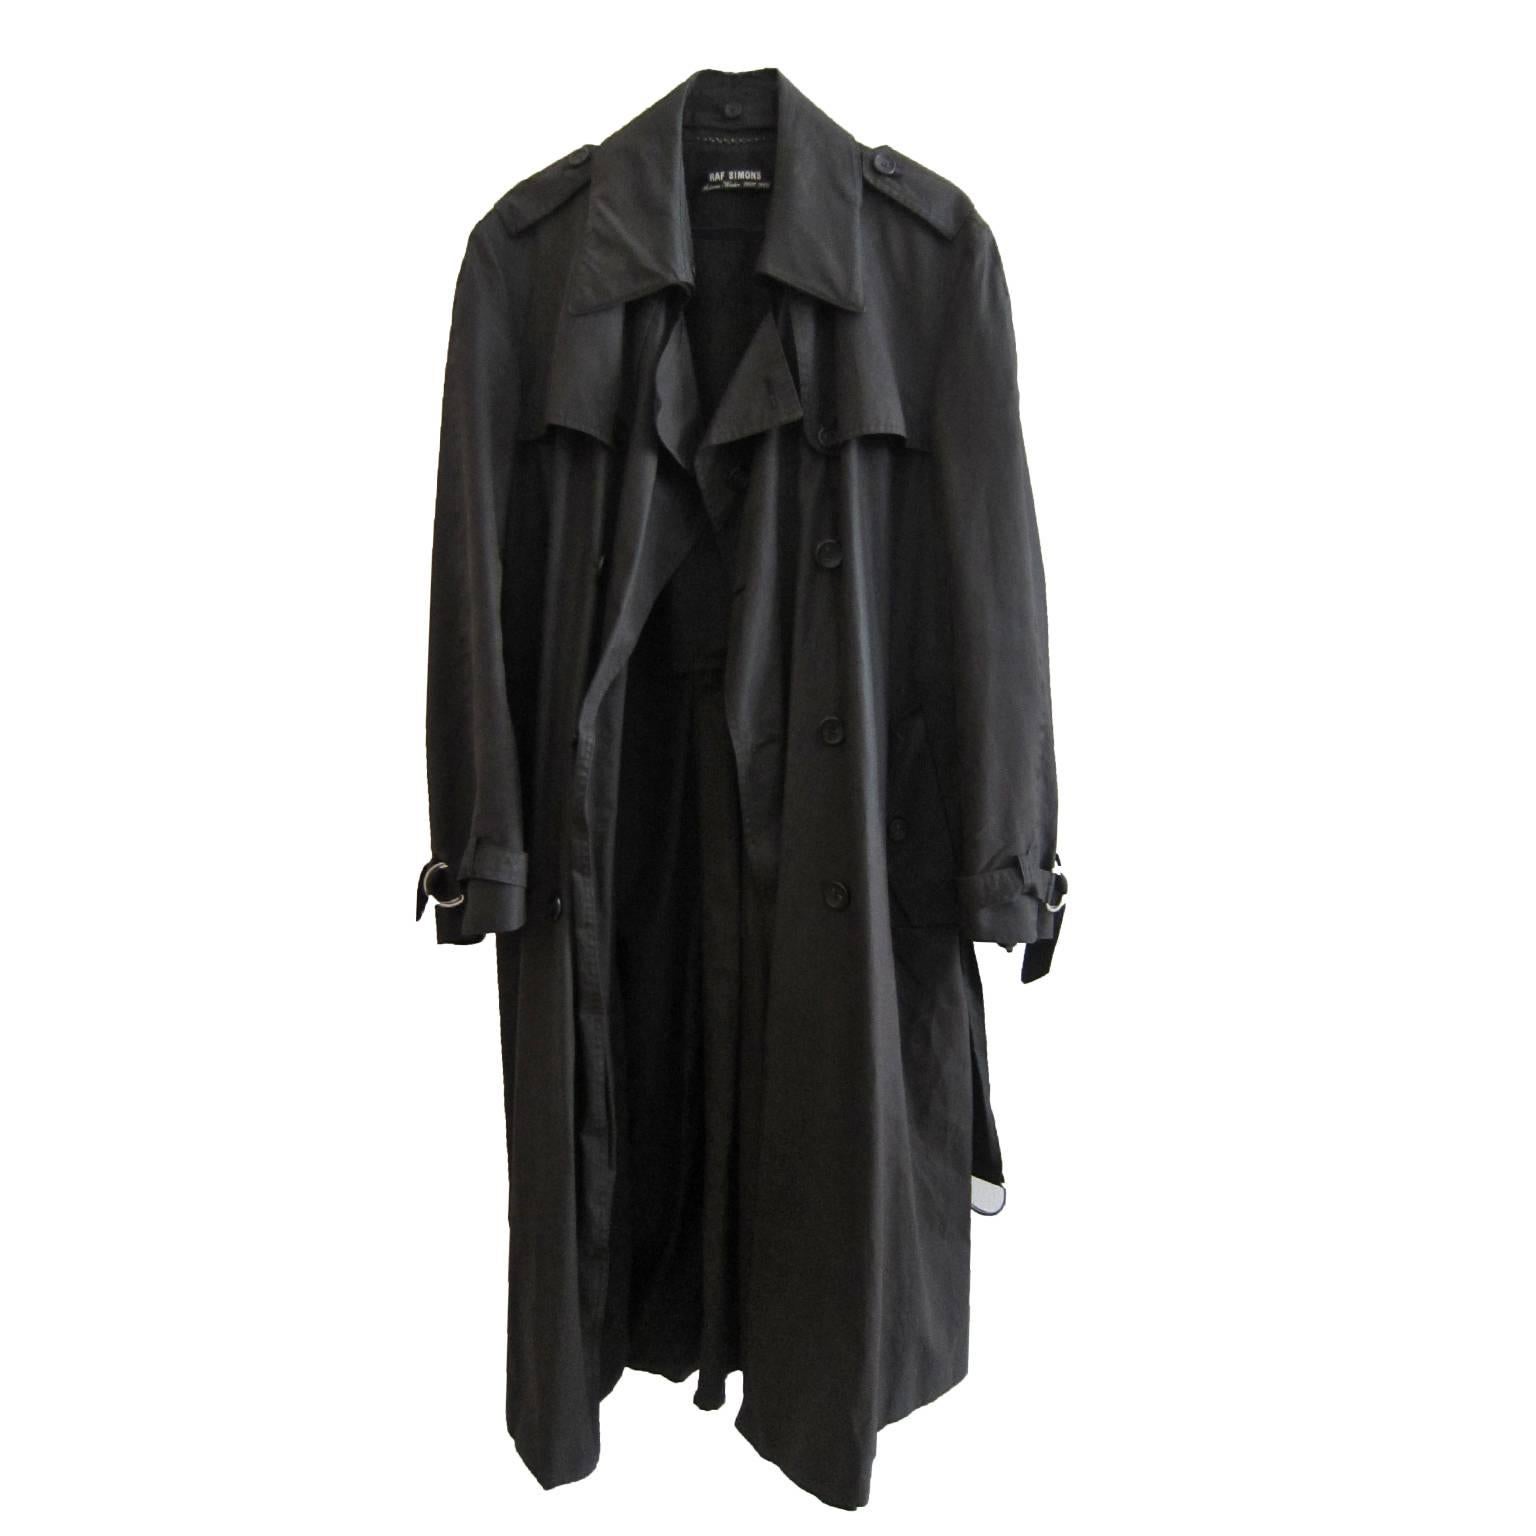 Raf Simons long military black waxed trench from the collection Riot Riot Riot AW 2001 - 2002.
Made in Belgium.
Size : 46 
